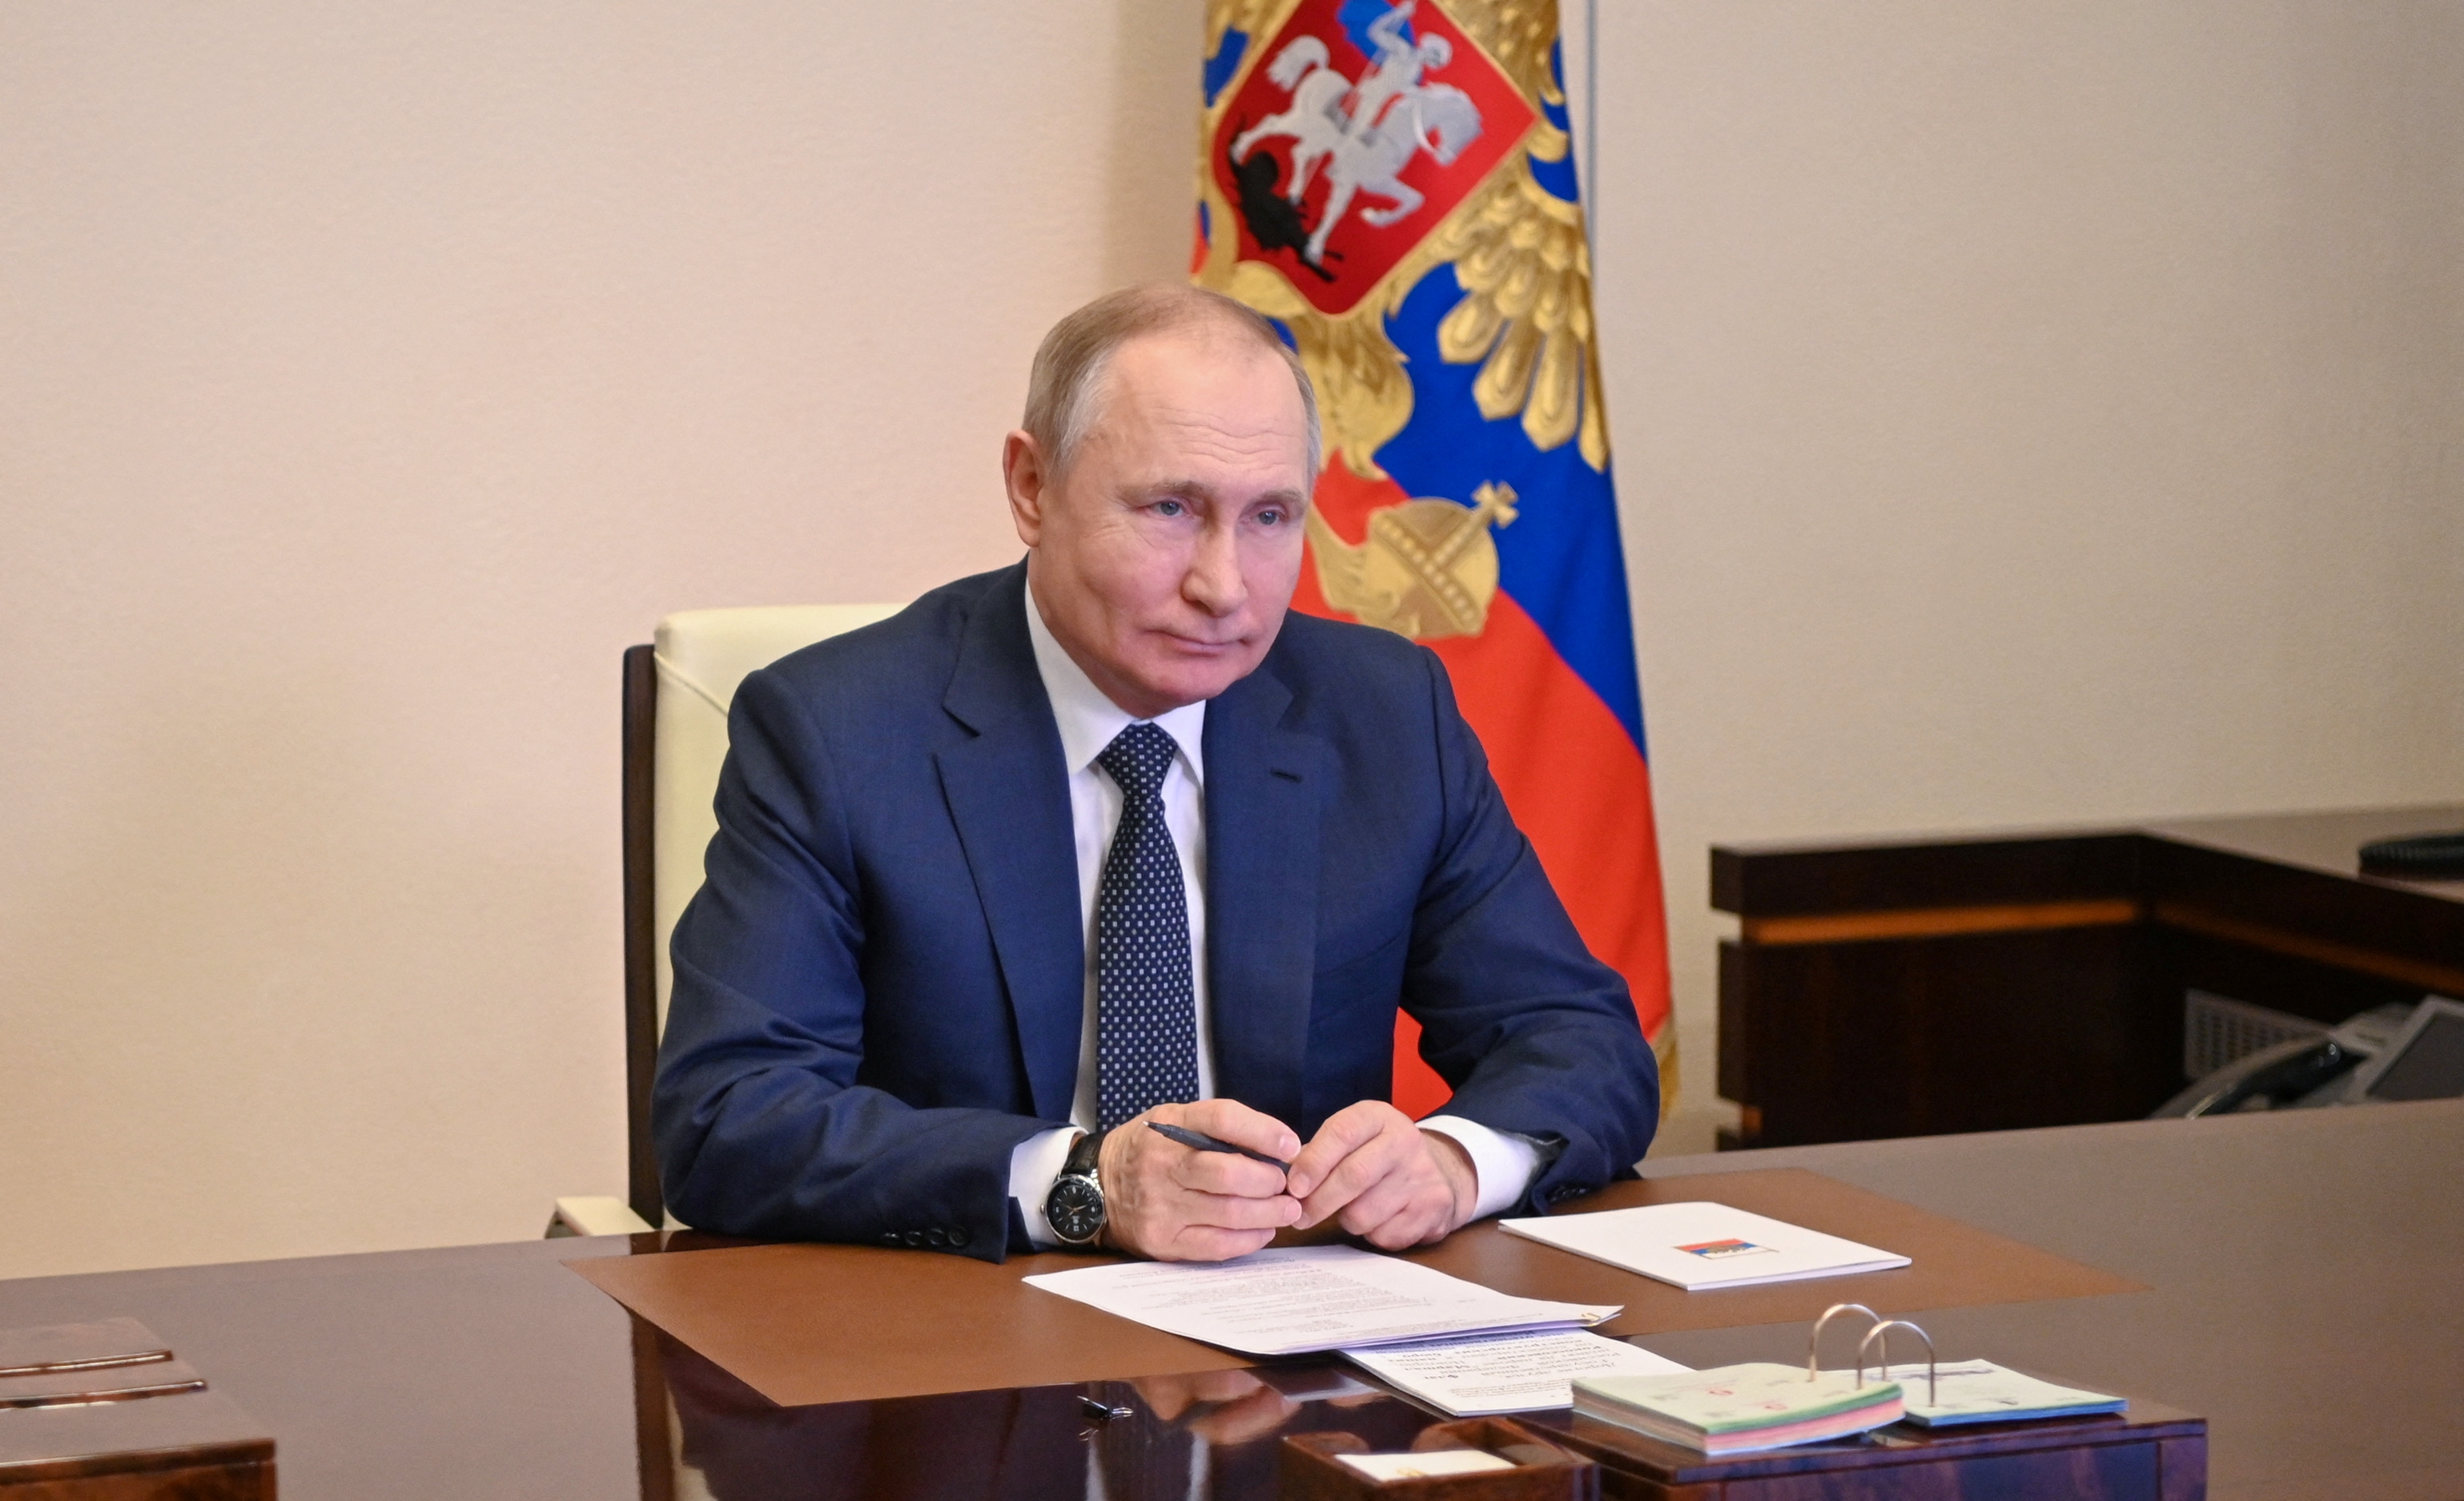 Russian President Putin takes part in a video link outside Moscow